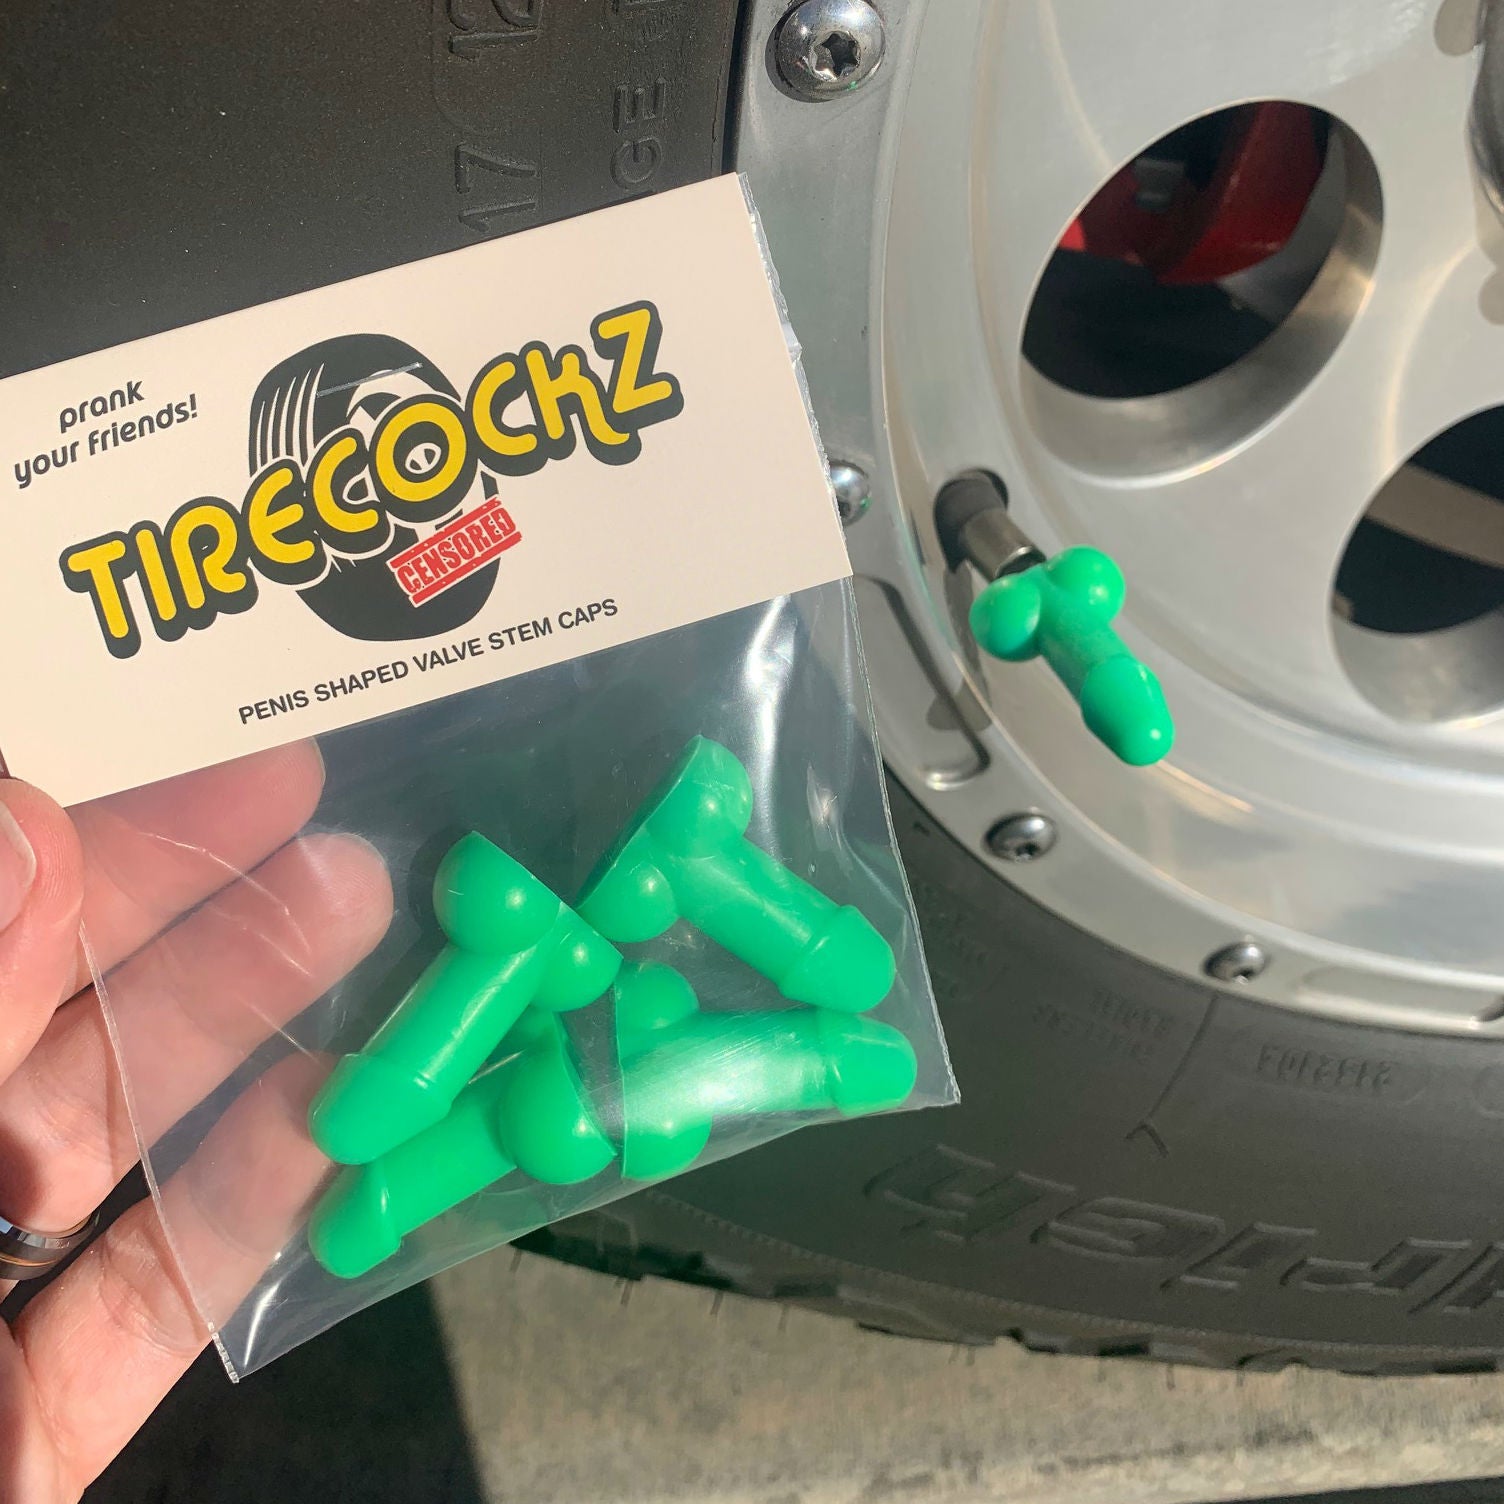 There Are Now Prank Weenie Shaped Tire Valve Stem Caps That You